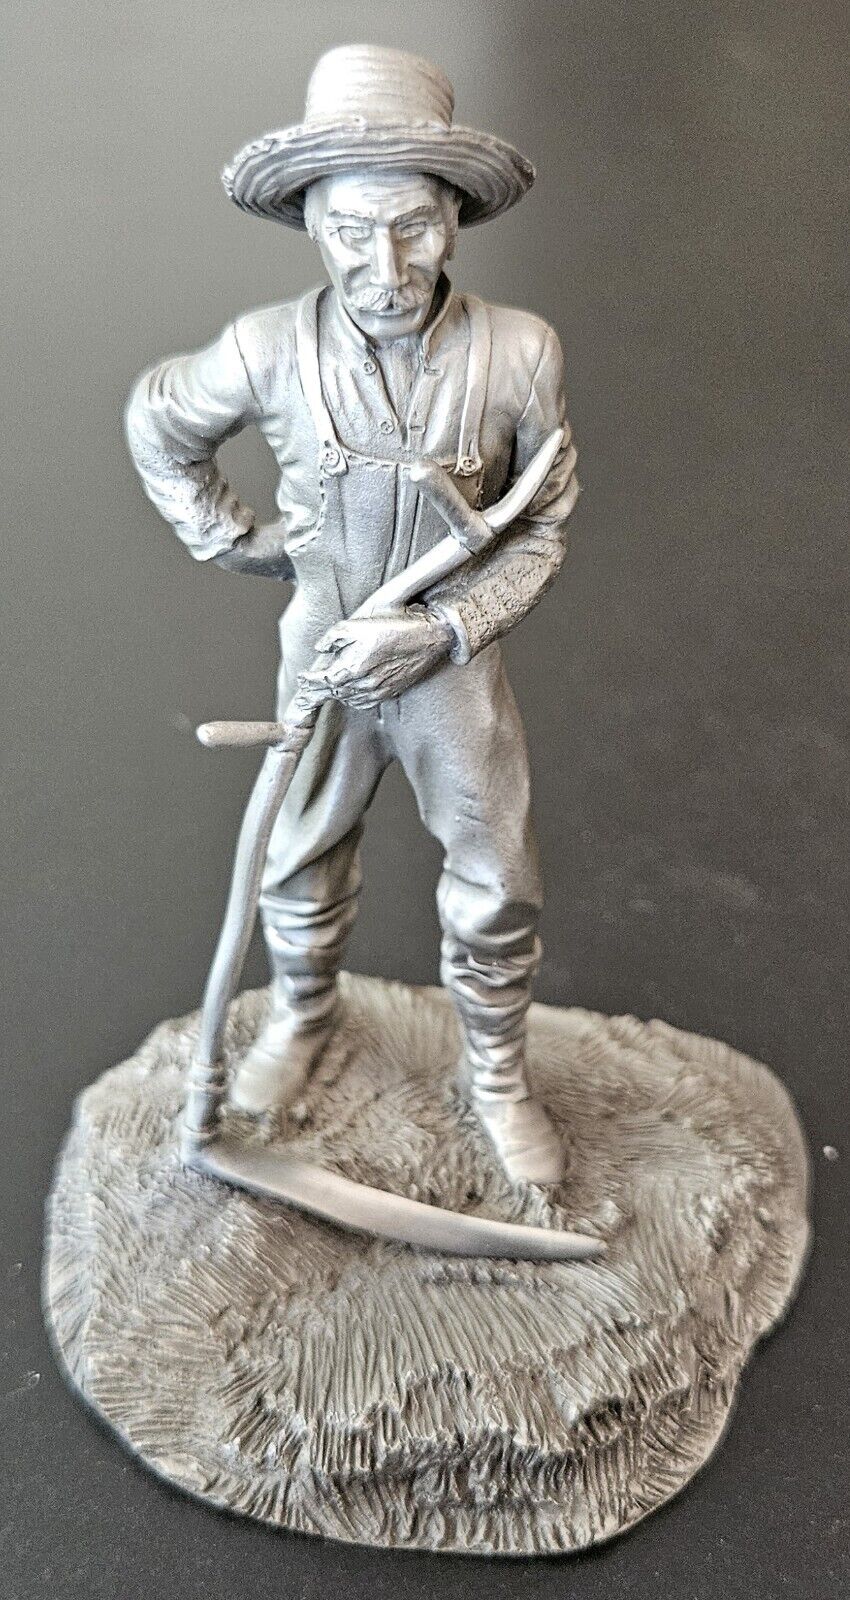 THE WHEAT FARMER -PEOPLE OF COLONIAL AMERICA VINTAGE FRANKLIN MINT PEWTER FIGURE